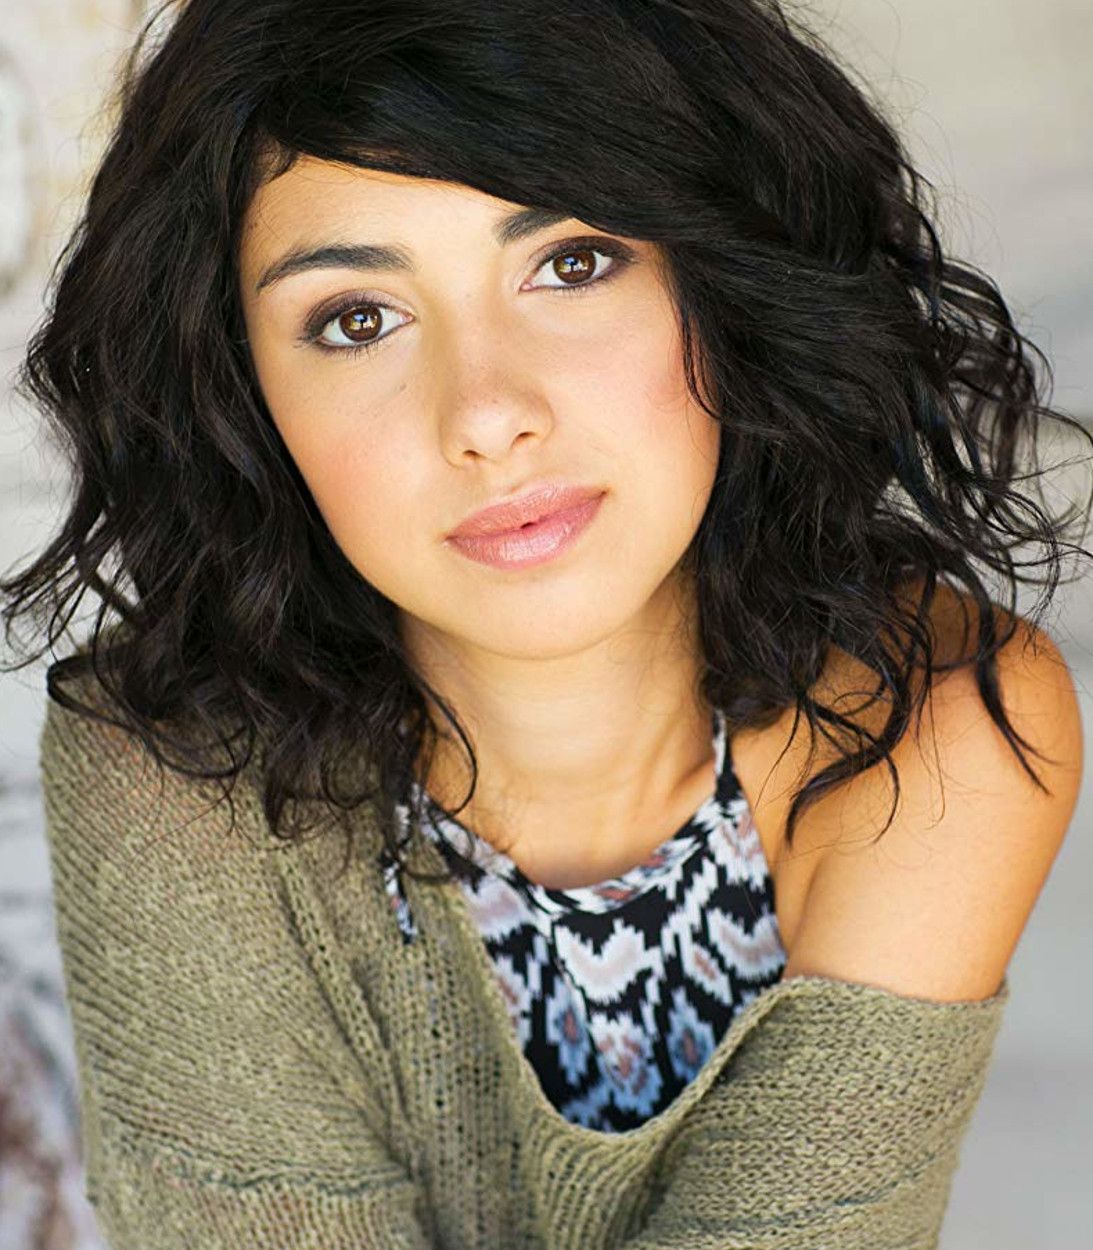 Alexa Mansour To Star In Walking Dead Spinoff